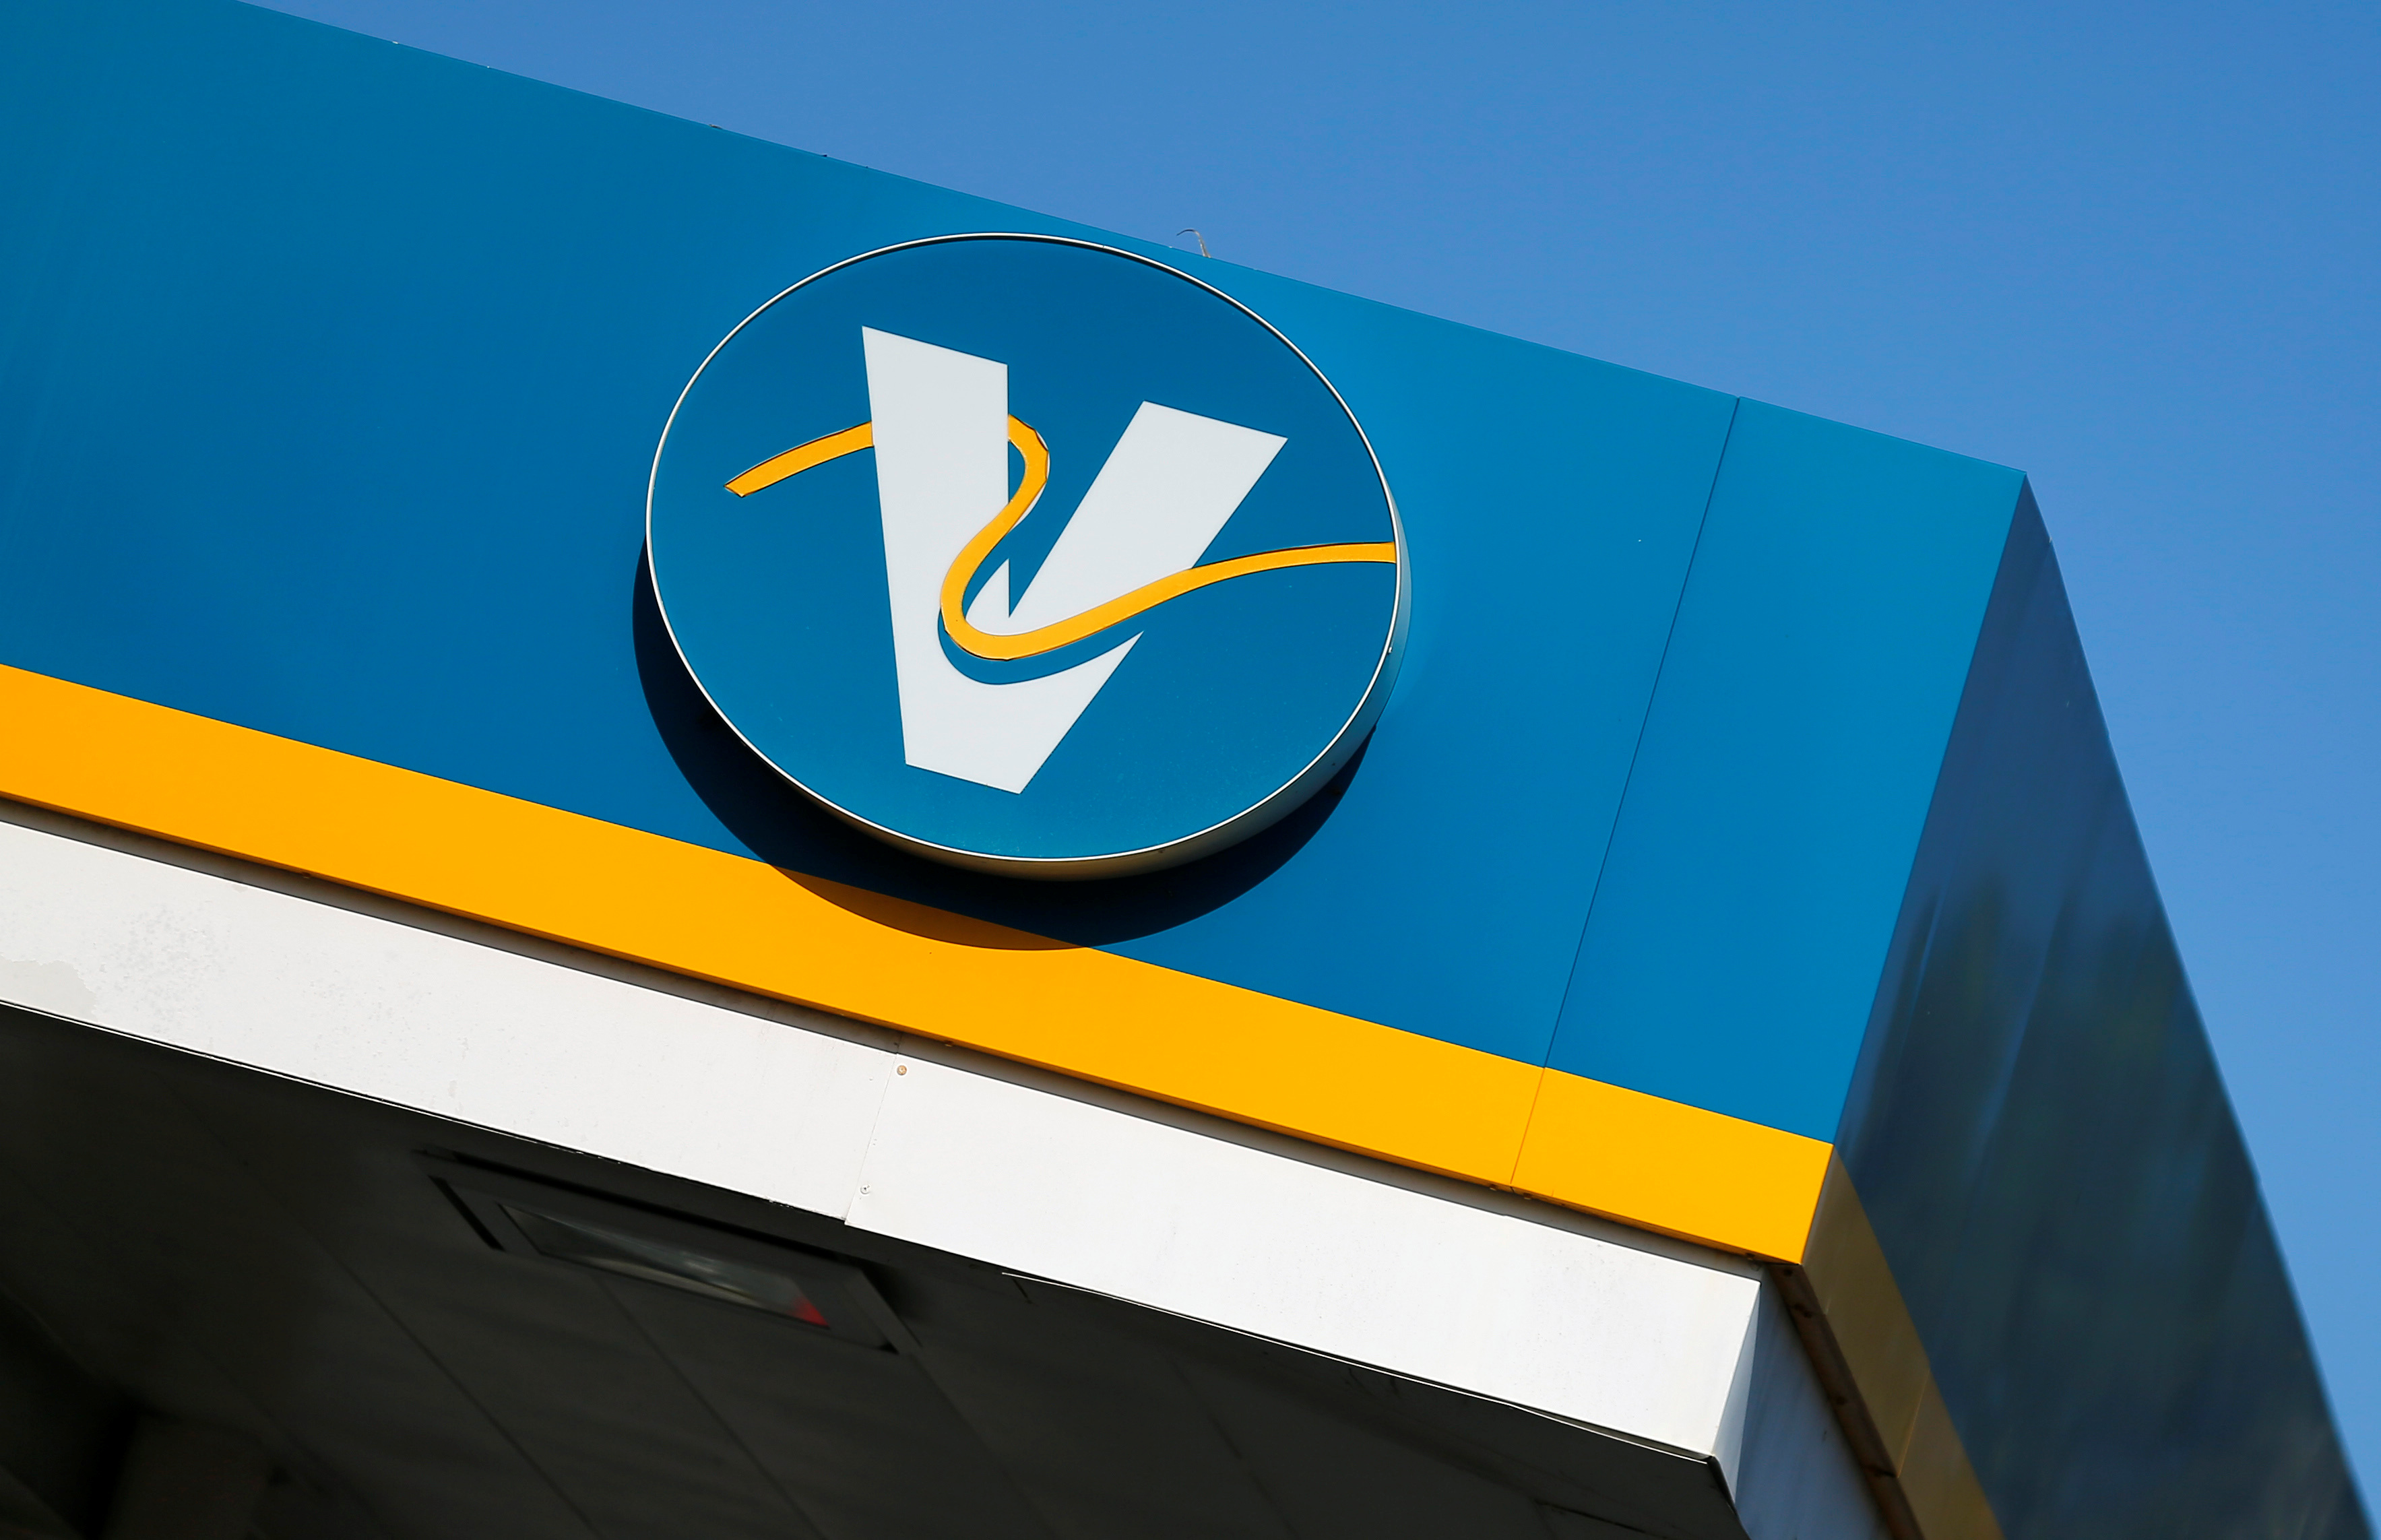 The logo for Valero Energy Corporation is shown at a Valero gas station in Encinitas, California